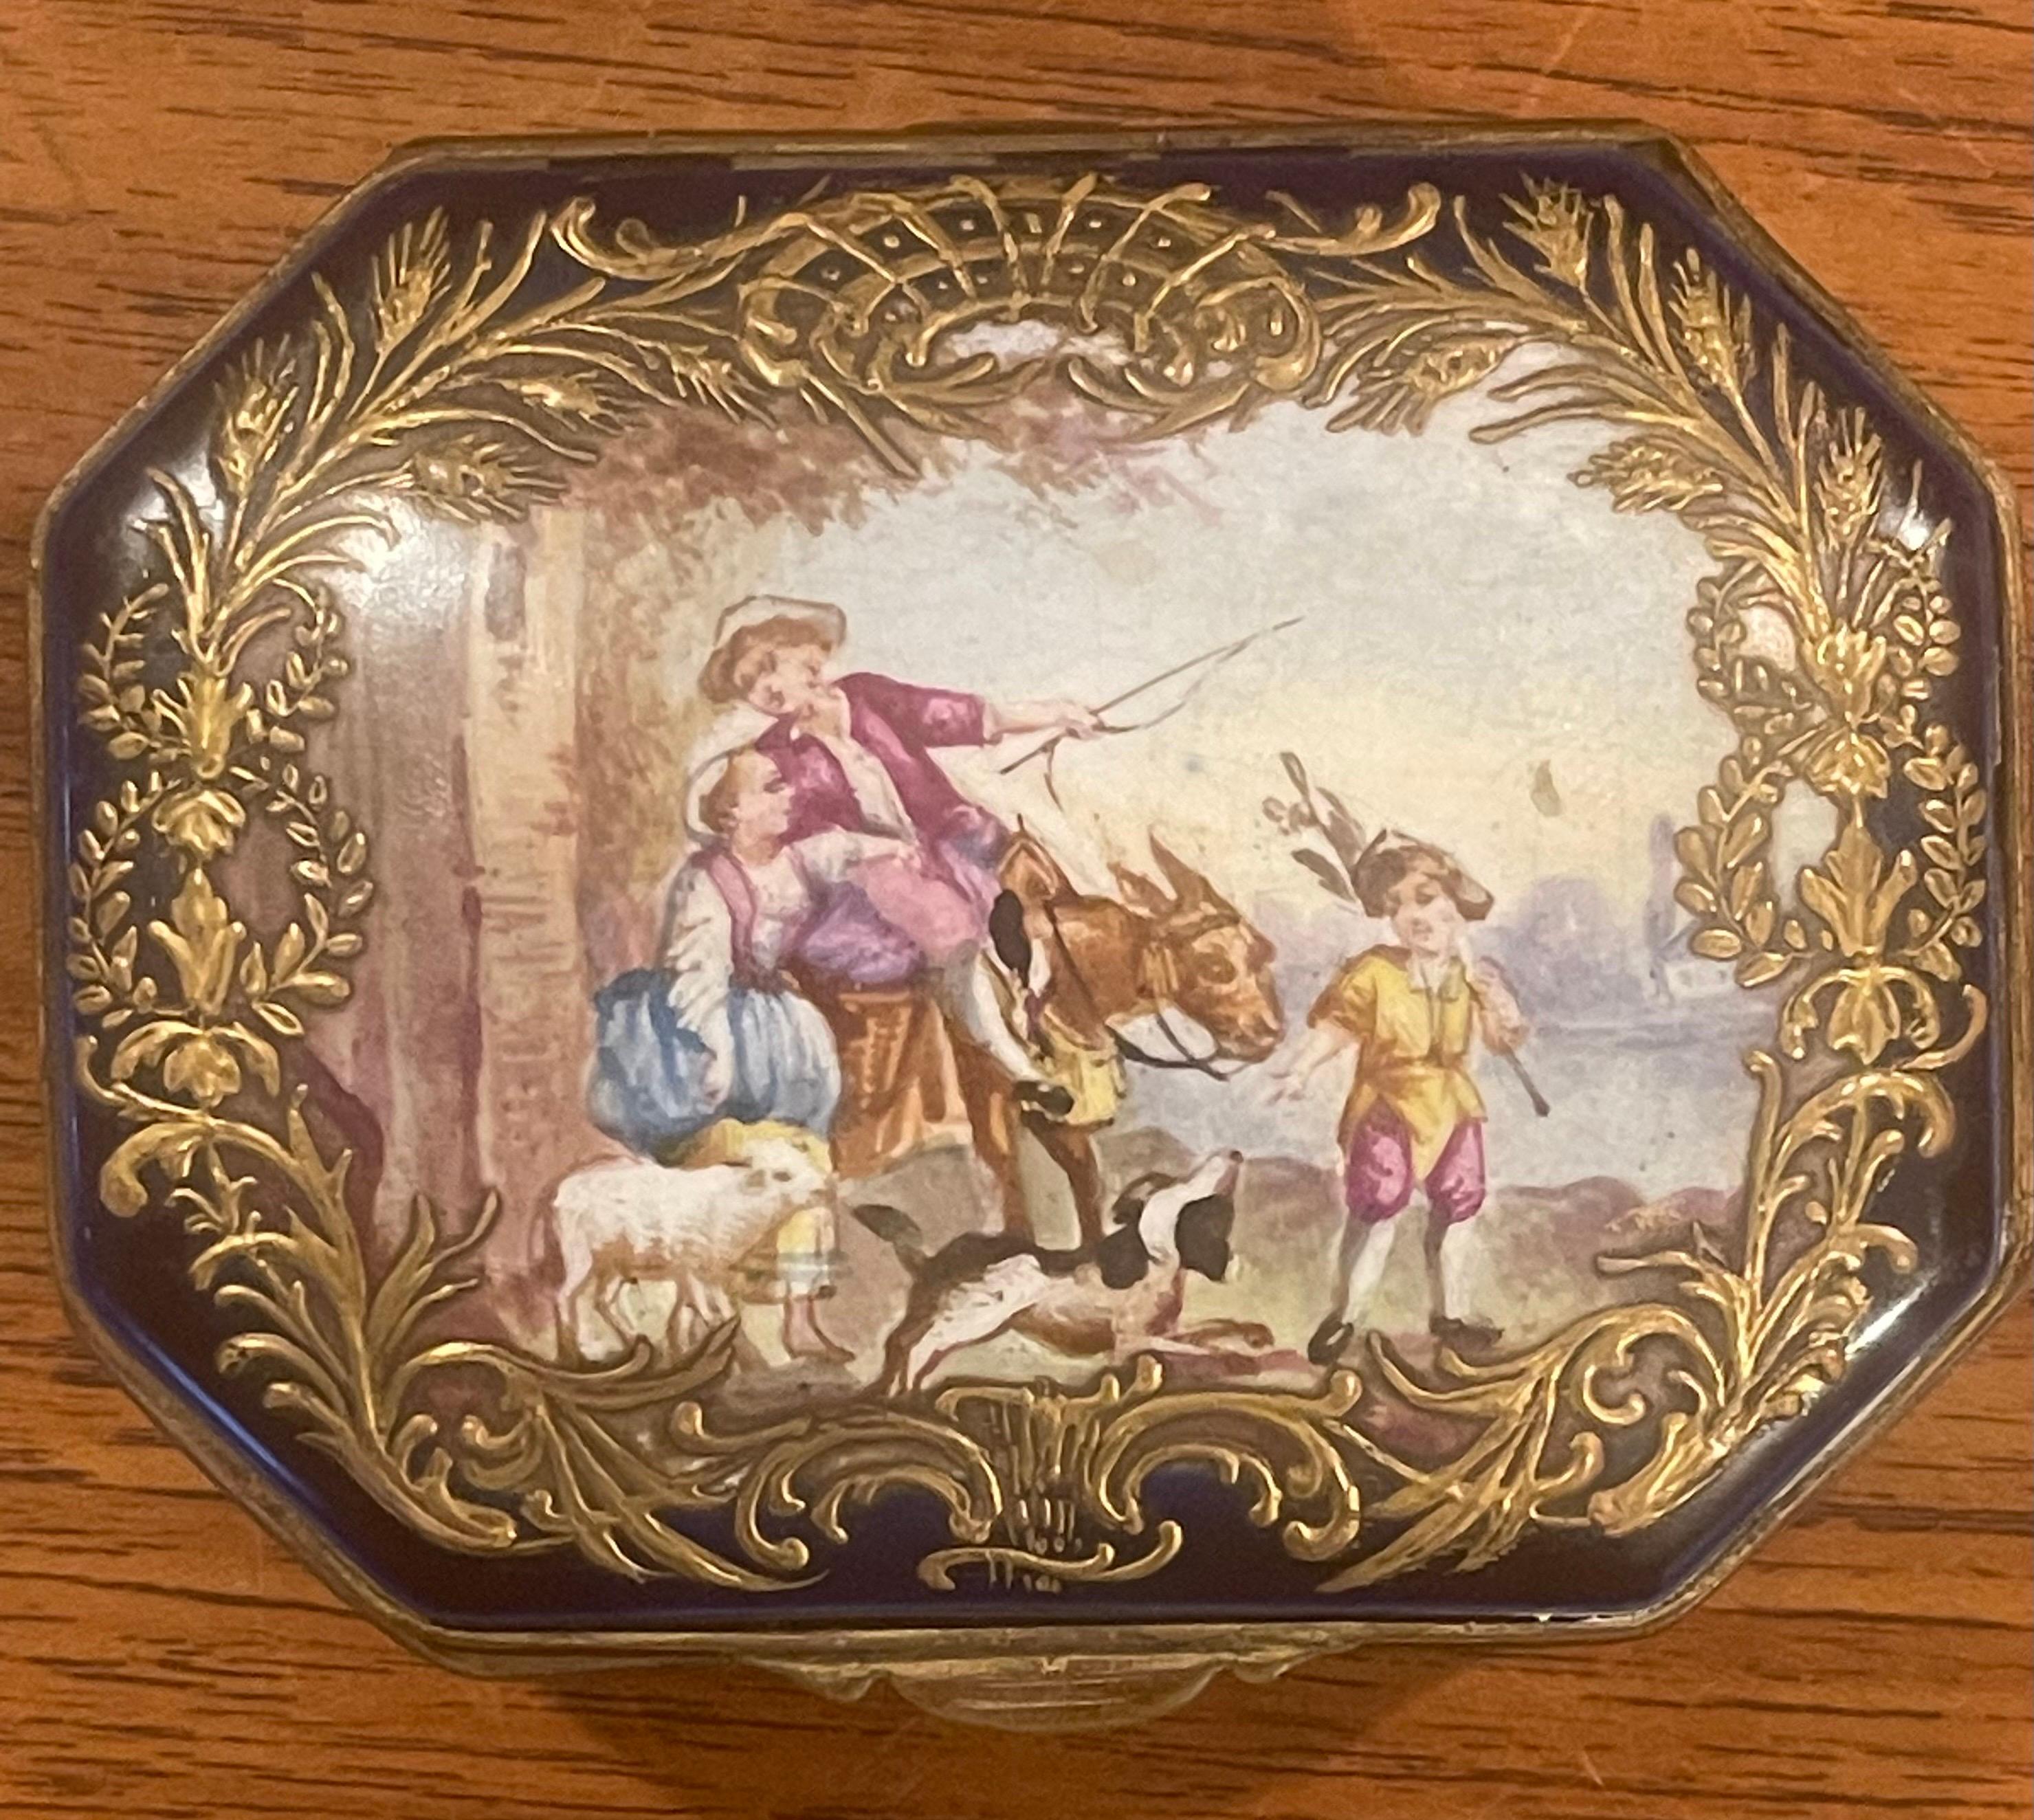 Hand-Painted 18th Century Victorian Enamel and Ormulu Lidded Box by Sevres